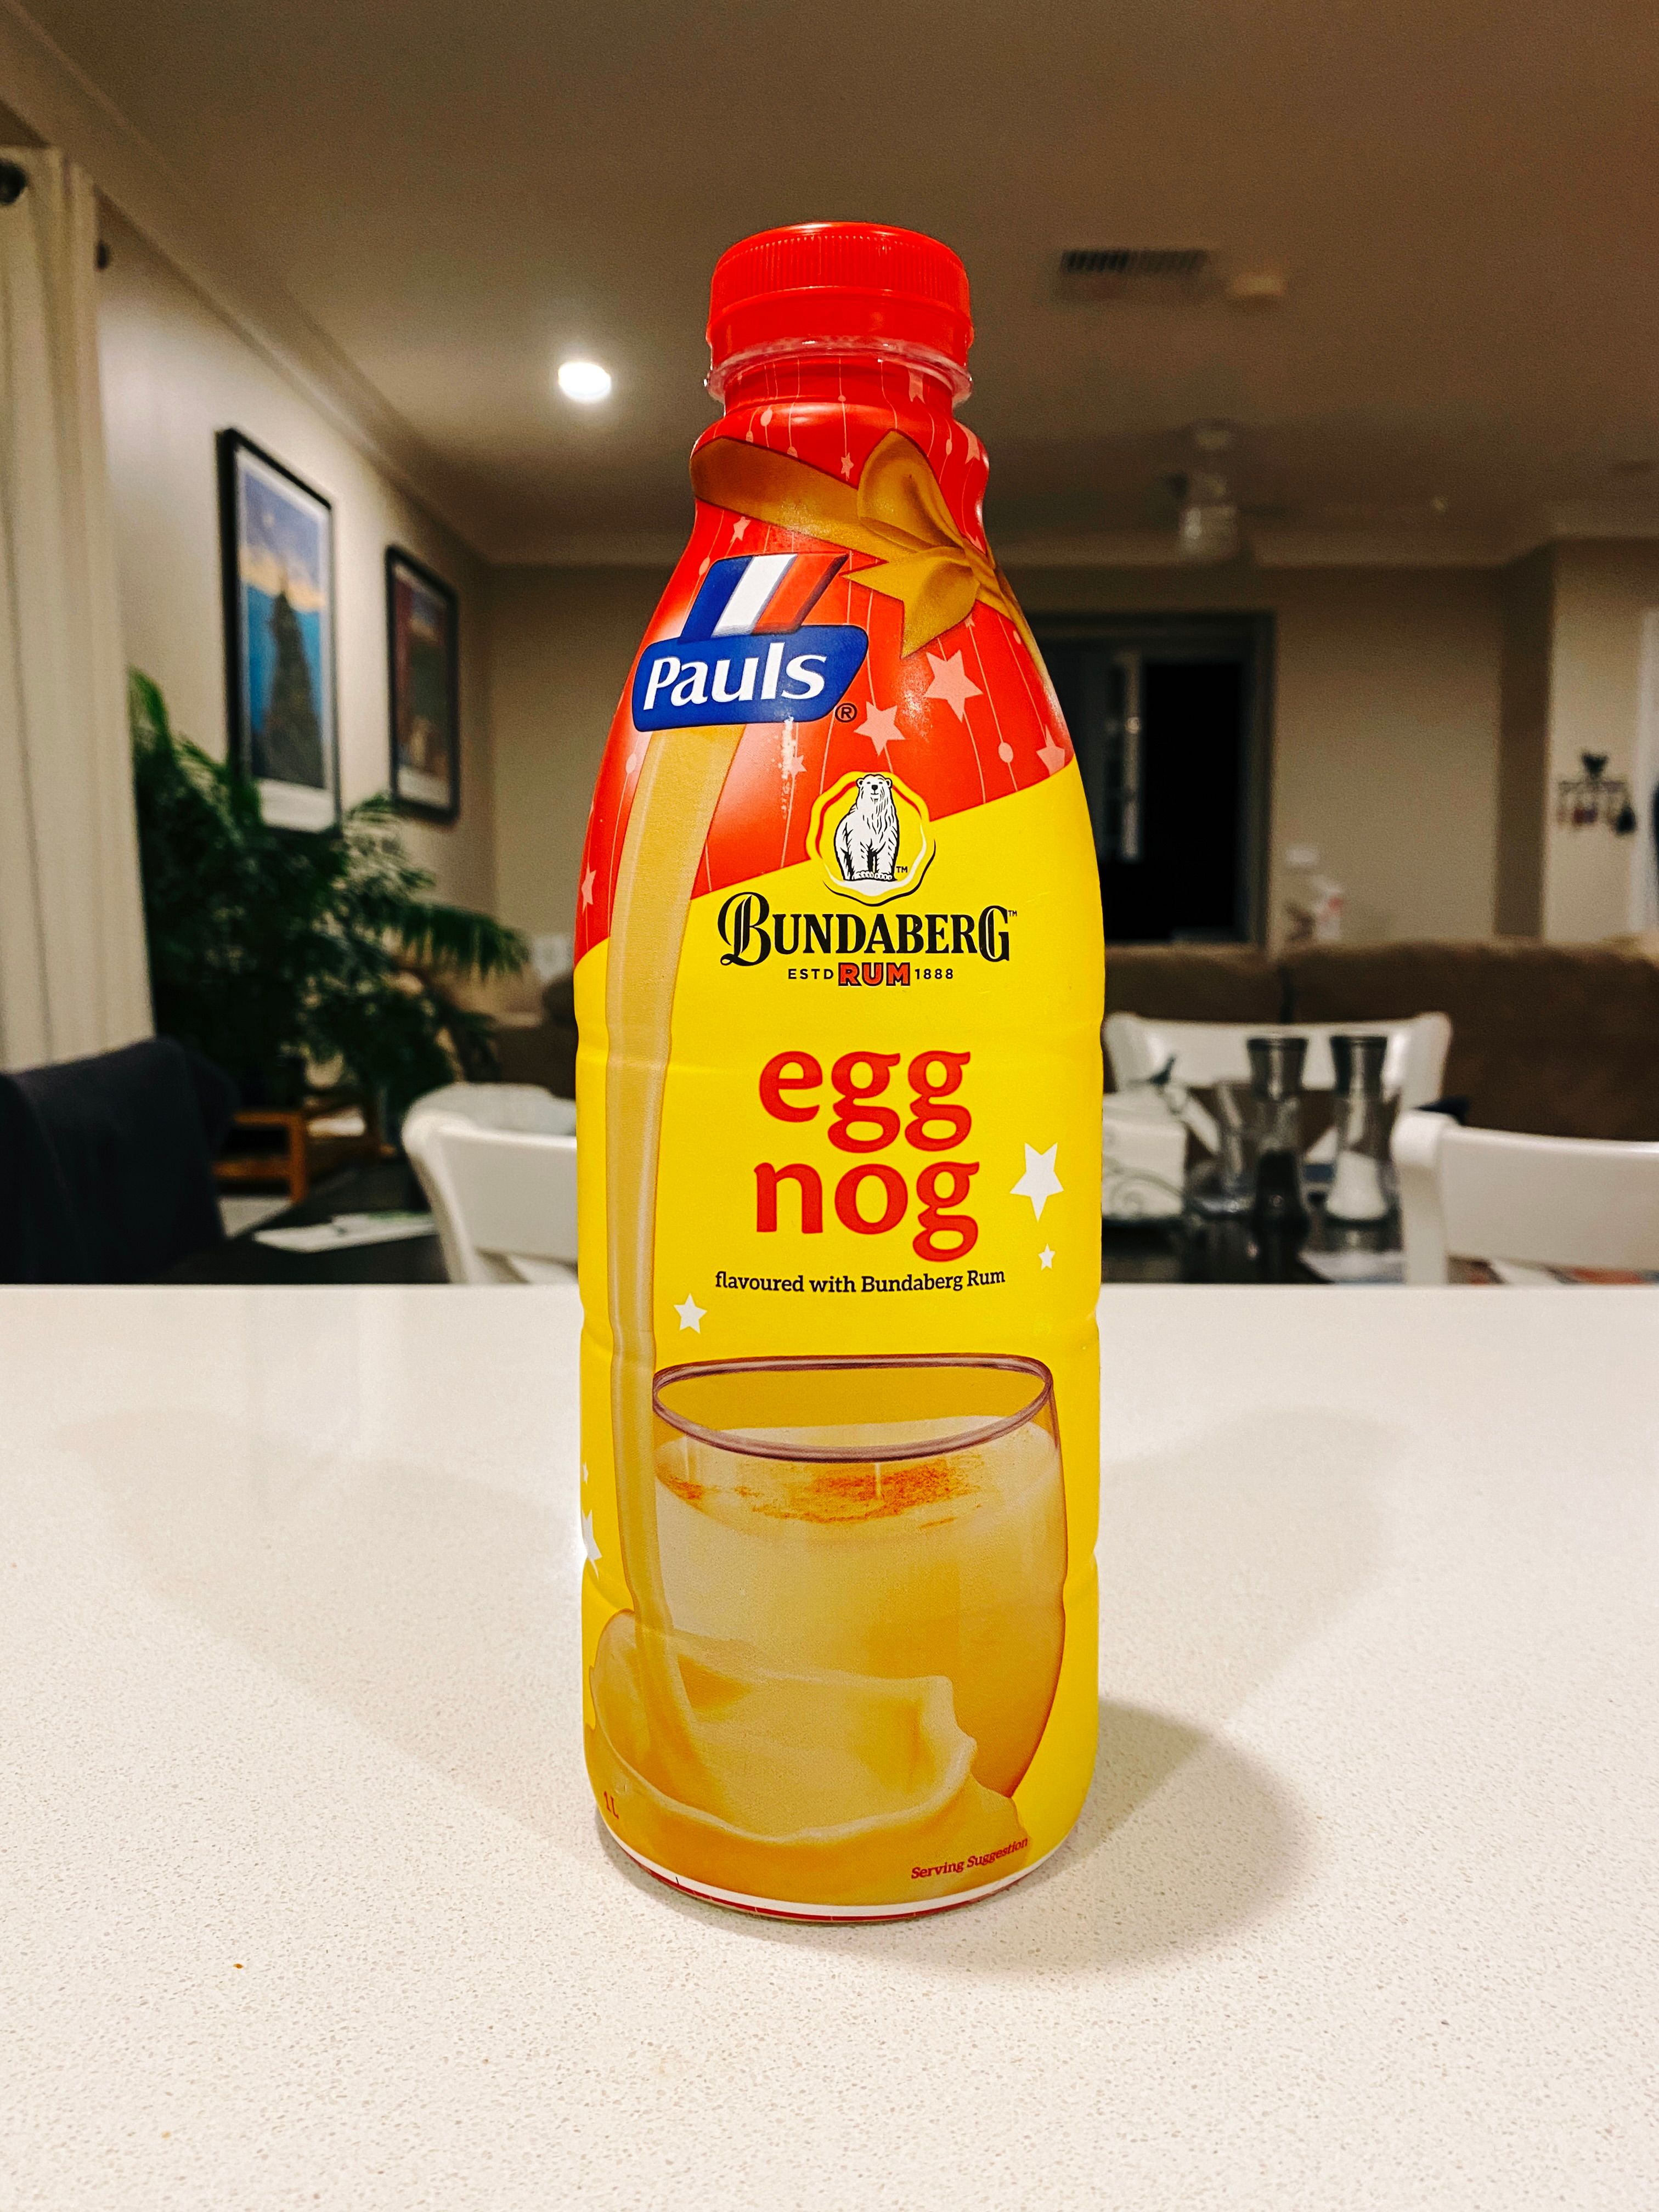 A photo of a bottle of Pauls brand egg nog that's flavoured with Bundaberg rum.